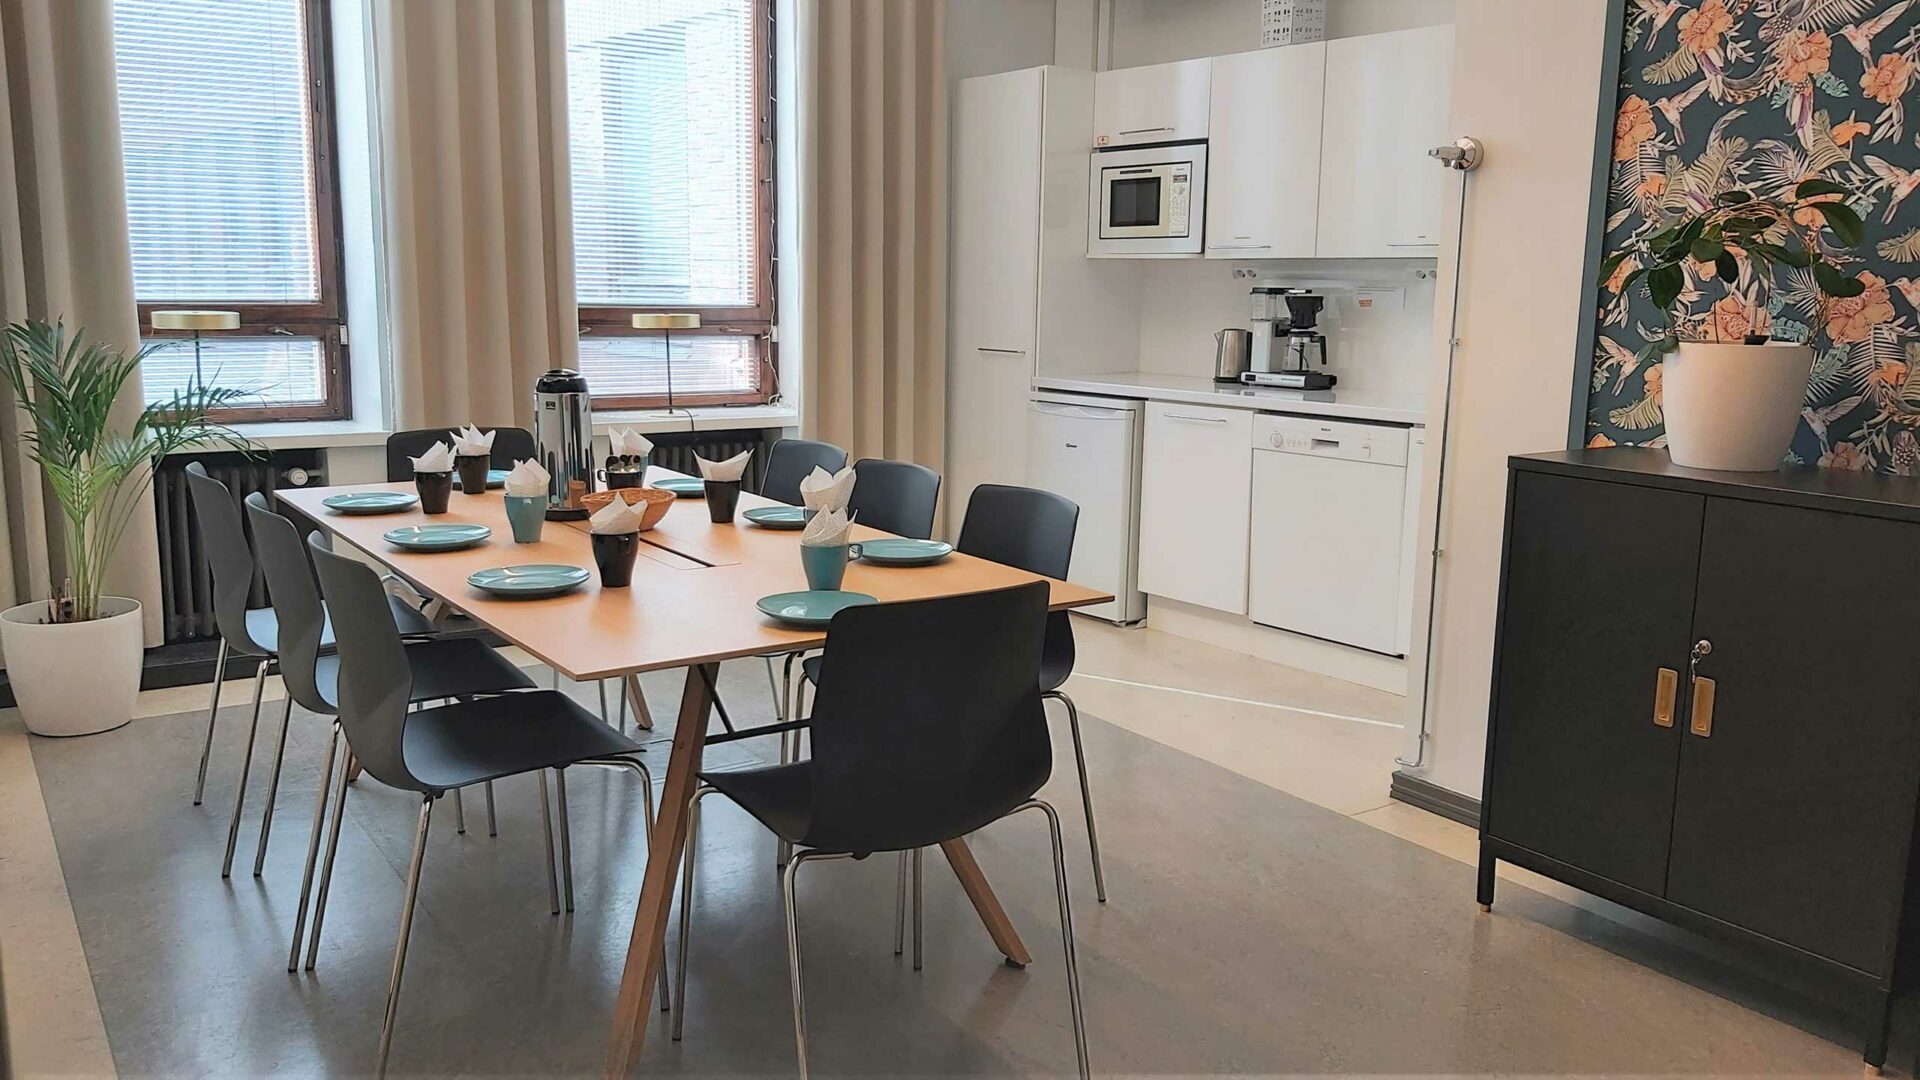 Kitchen/smaller meeting room with a table and chairs for 8 persons.